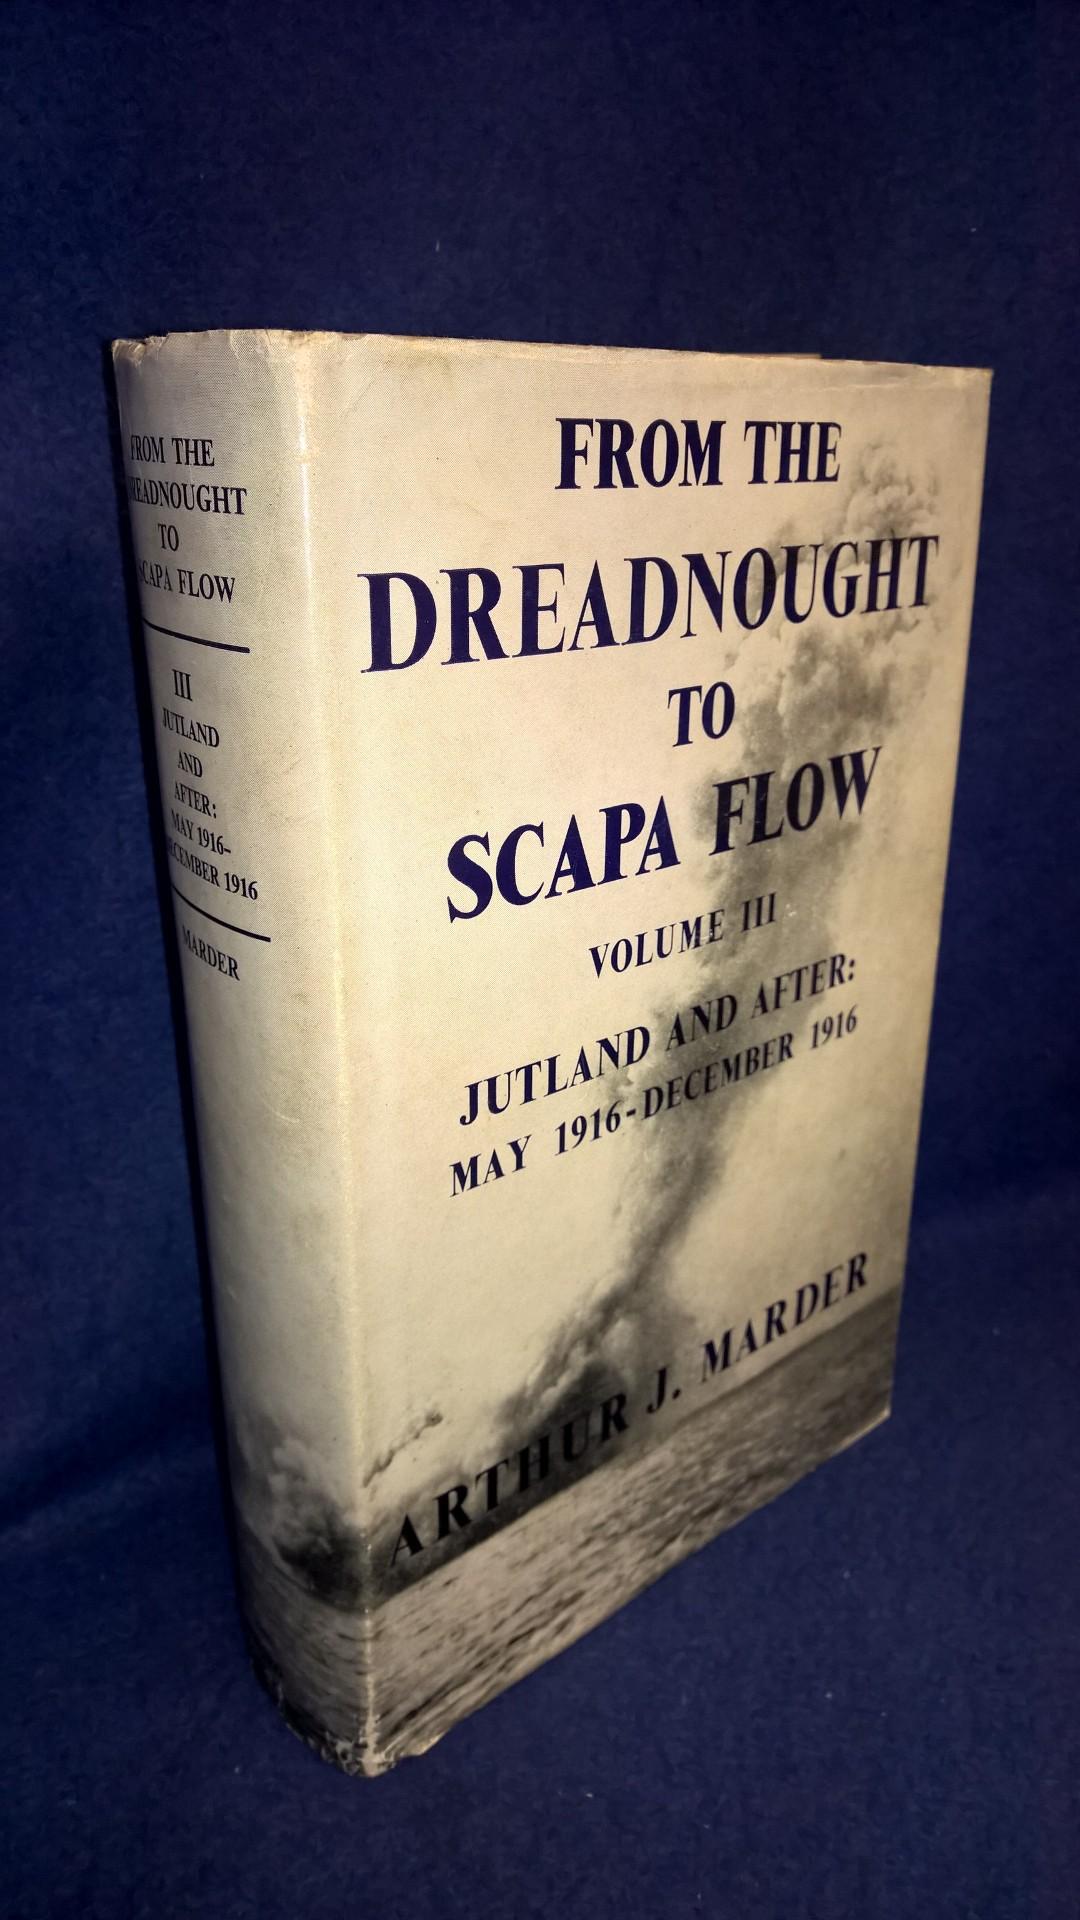 From the Dreadnought to Scapa Flow. Volume III. Jutland and After (May 1916-December 1916).